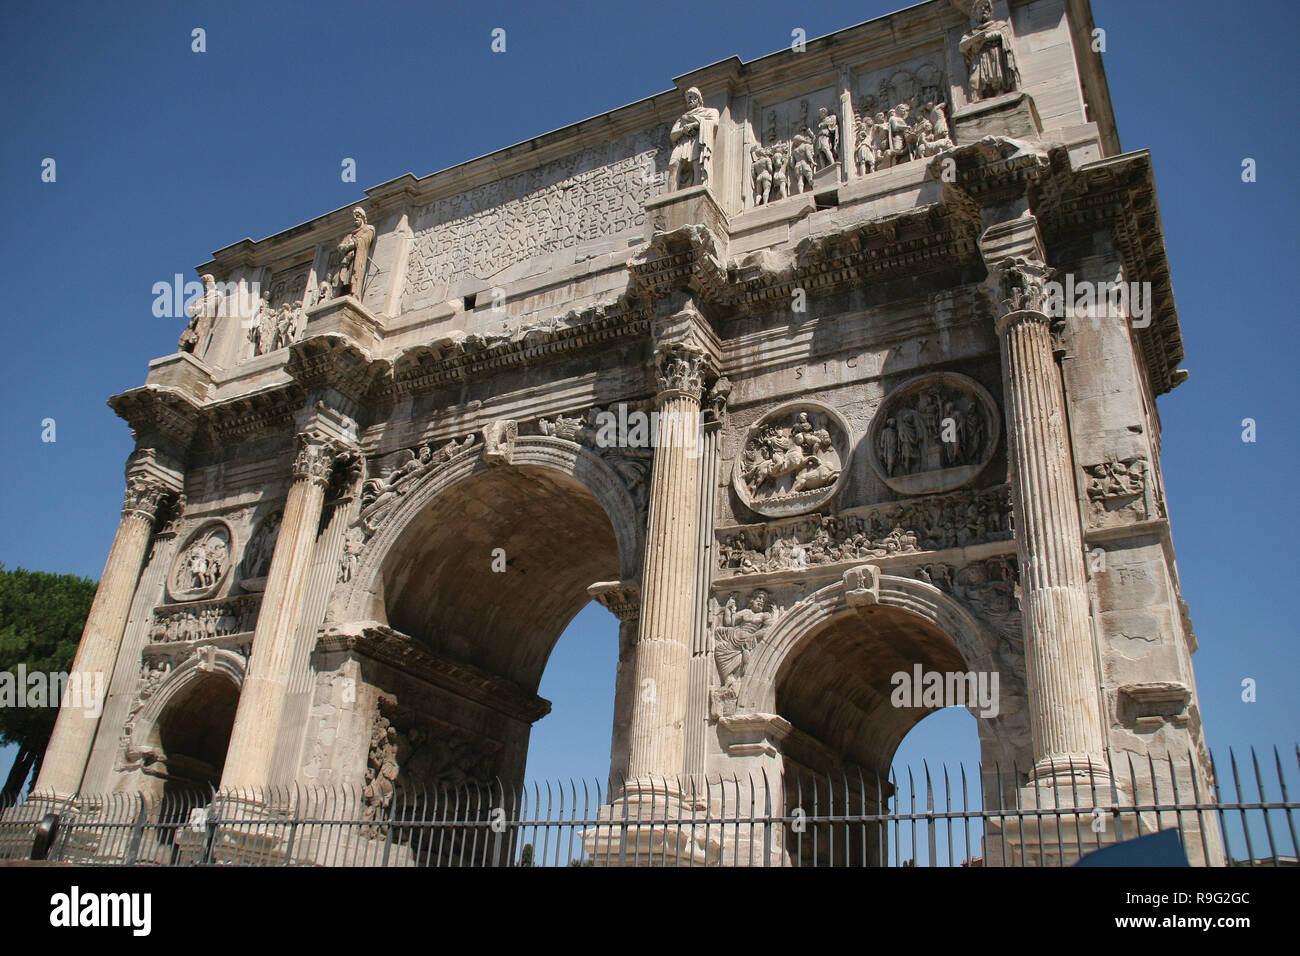 Roman Art. Arch of Constantine. Triumphal arch. It was erected to commemorate  Constantine victory over Maxentius at the Batlle of Milvian Bridge (October 28, 312). Reuse of parts of earlier buildings. View  the arch seen form Via Triumphalis. IV century AD. Rome. Italy. Europe. Stock Photo